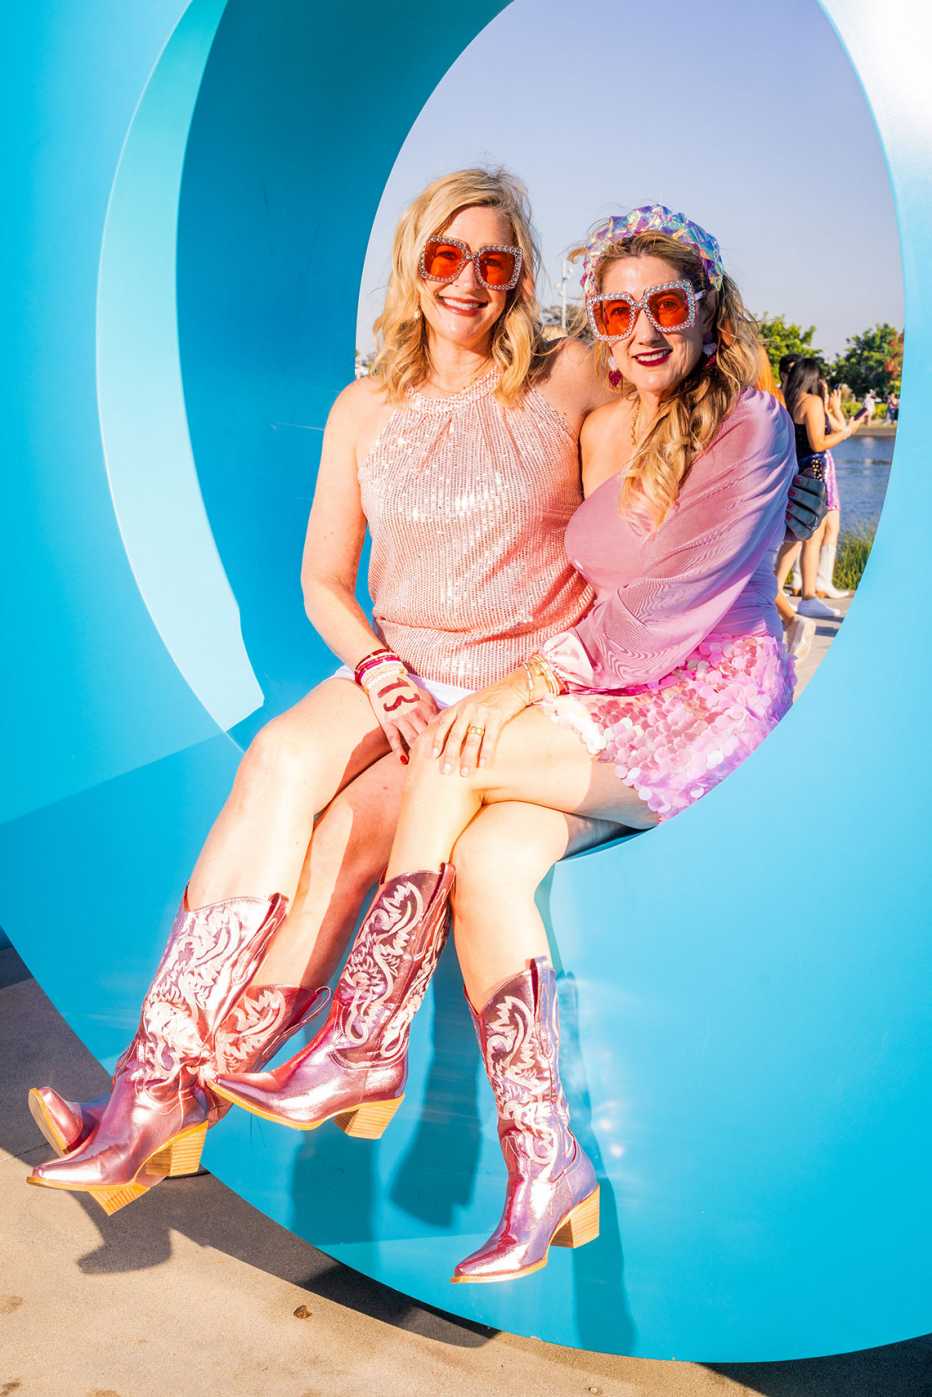 friends kathleen holtzer and keri evilsizor posing in sparkly pink outfits and metallic pink cowboy boots outside sofi stadium in los angeles california